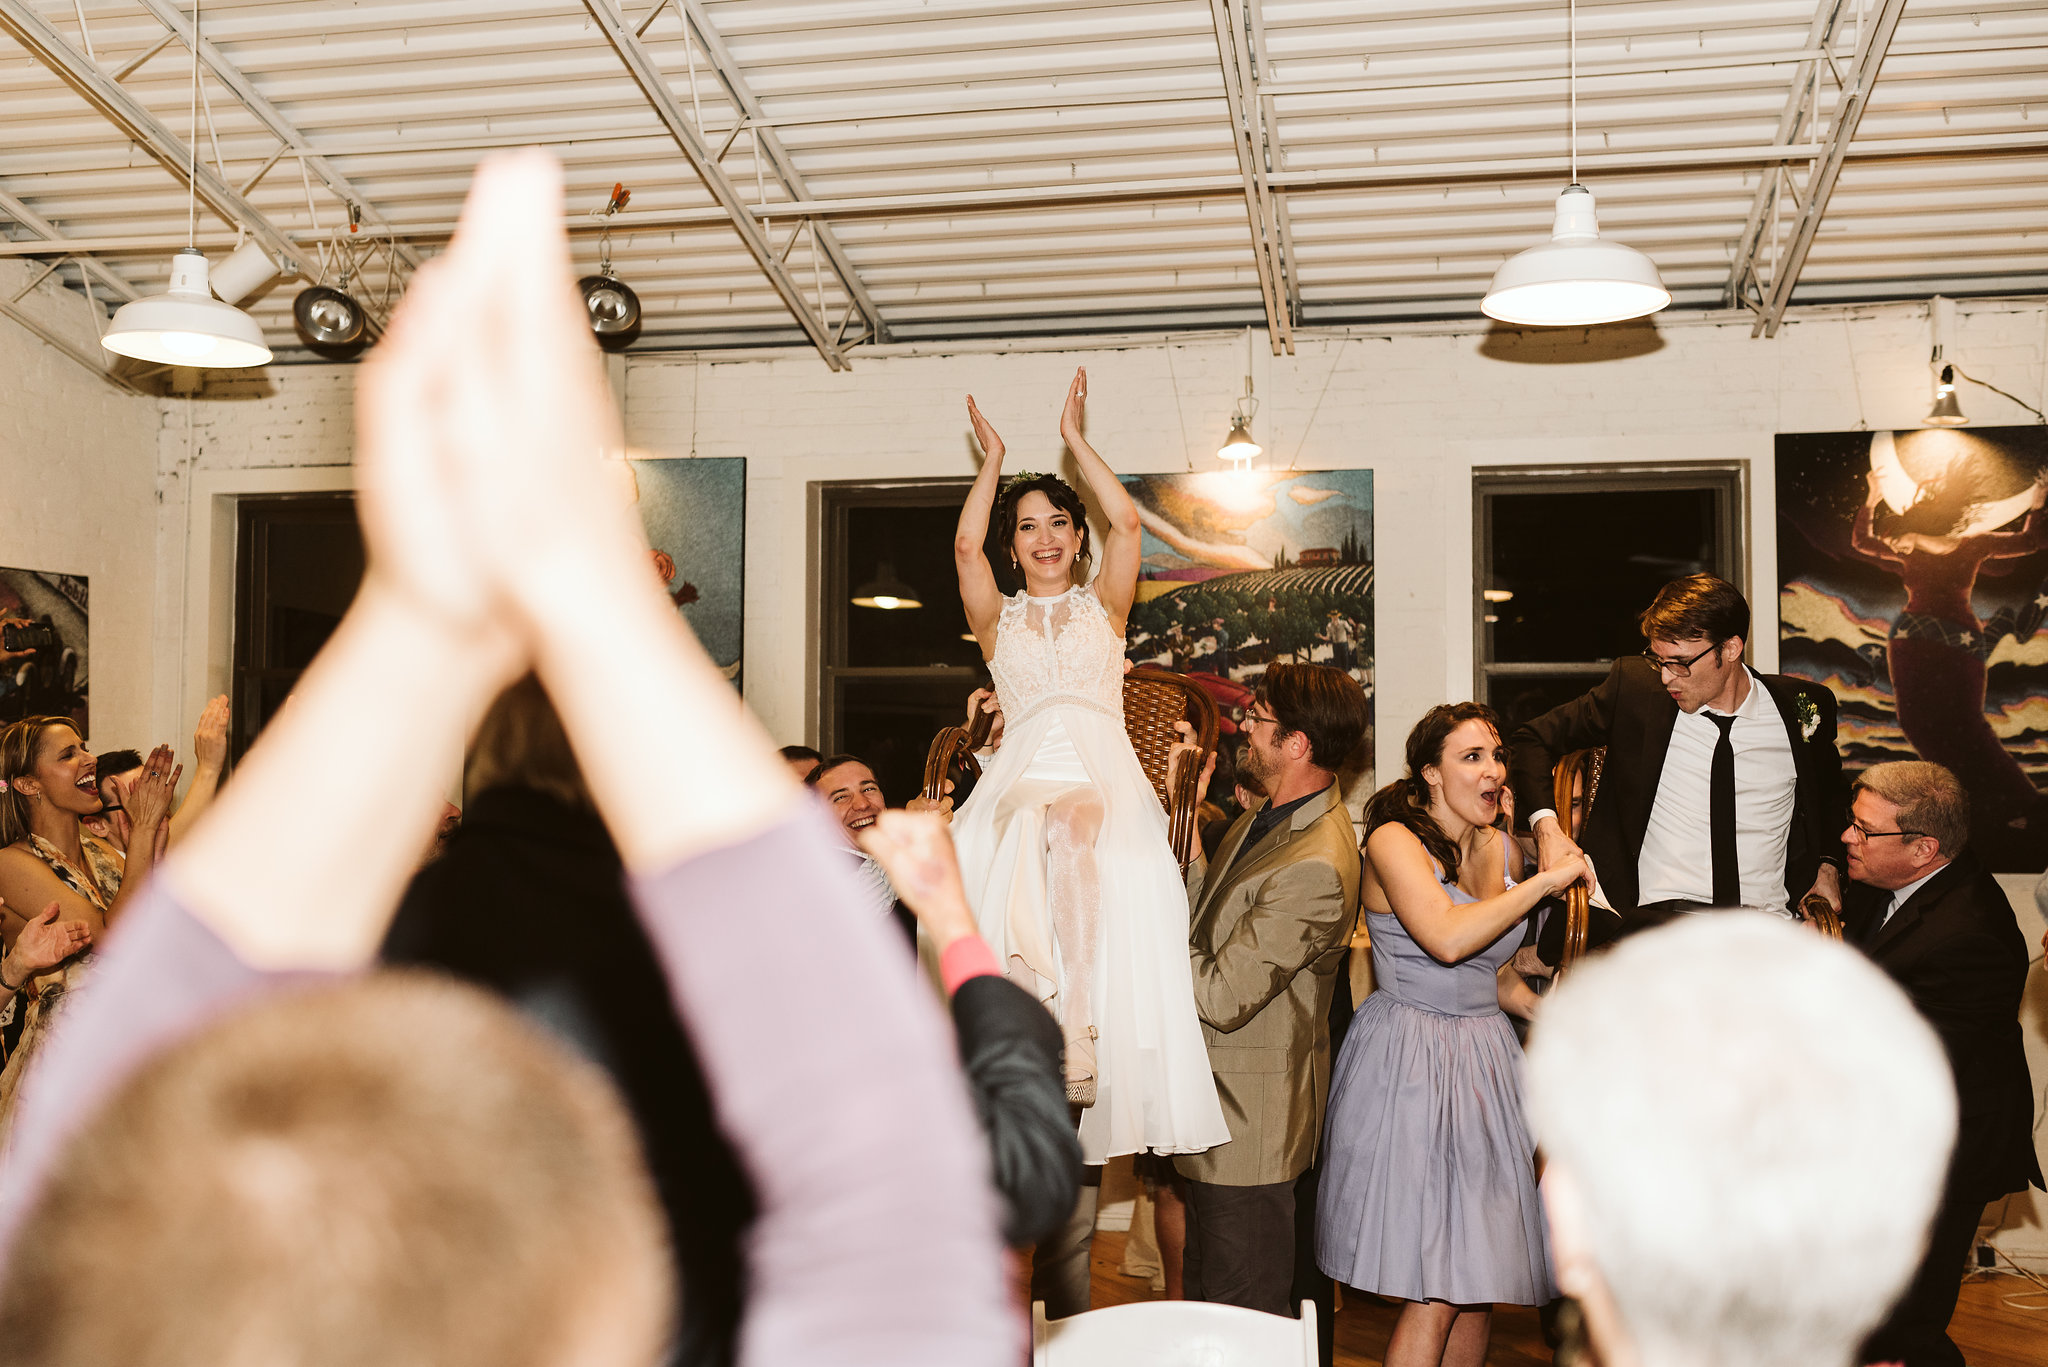  Baltimore, Maryland Wedding Photographer, Hampden, Eco-Friendly, Green, The Elm, Simple and Classic, Vintage, Bride and Groom Lifted in Chairs During the Hora 